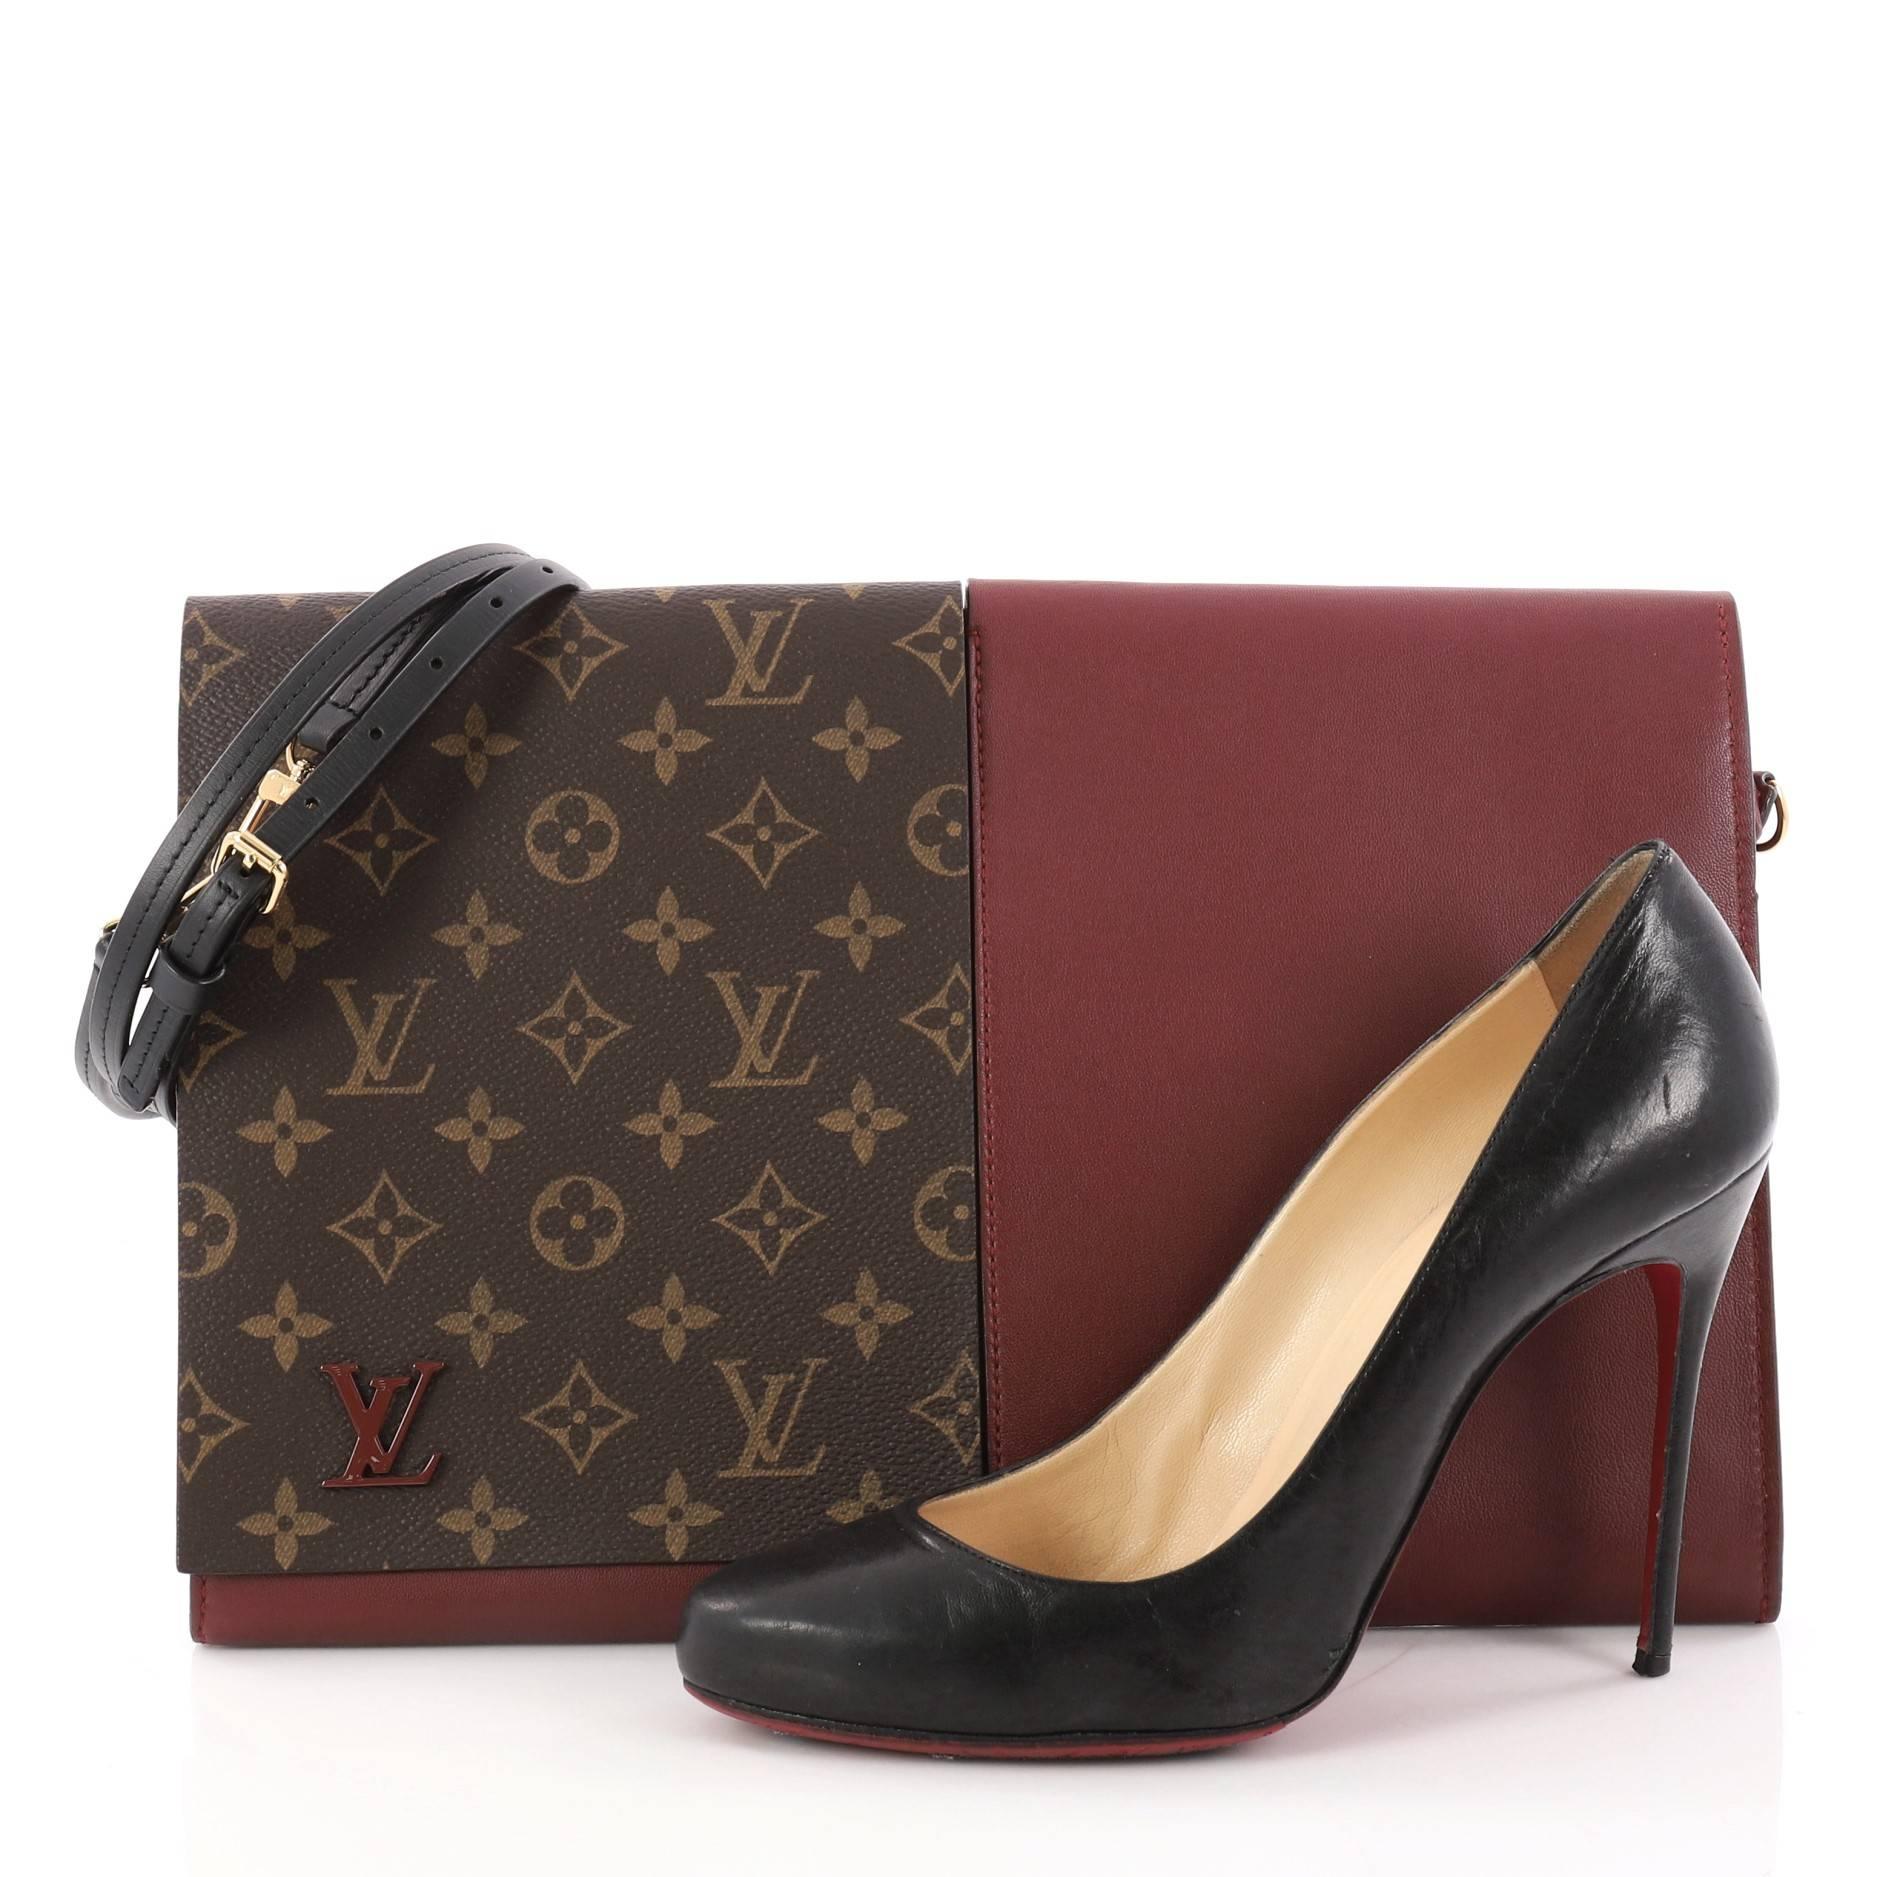 This authentic Louis Vuitton Flip Flap Pochette Monogram Canvas and Leather Medium is a chic and sleek piece. Crafted in brown monogram coated canvas and maroon leather, this bag features a detachable leather strap, double flap opening and gold-tone